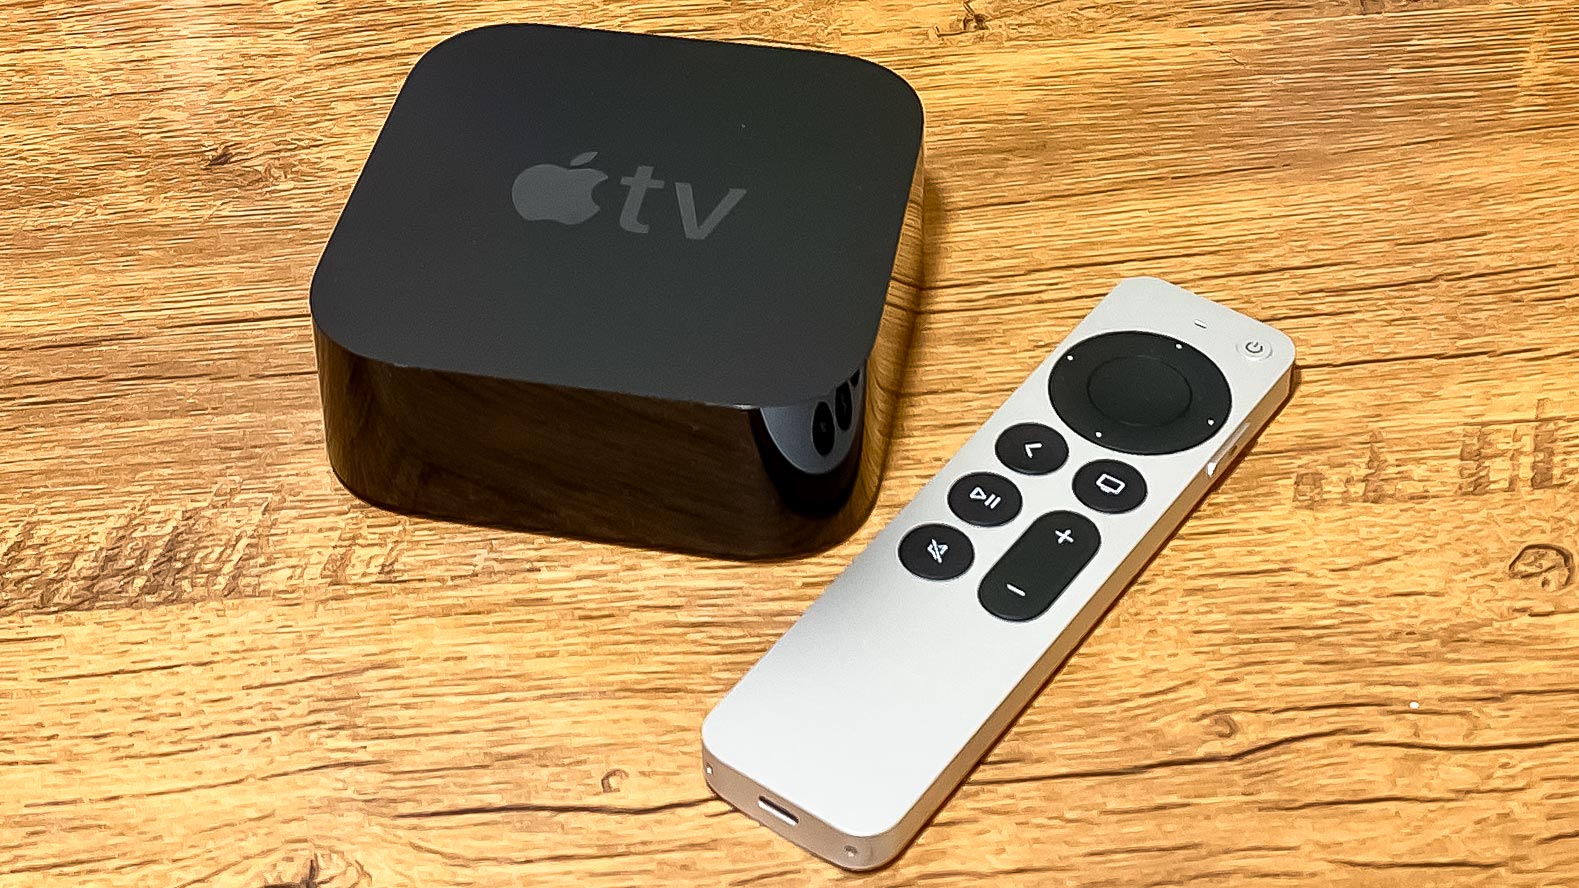 Apple TV could get cheaper this year to take on Chromecast and Roku